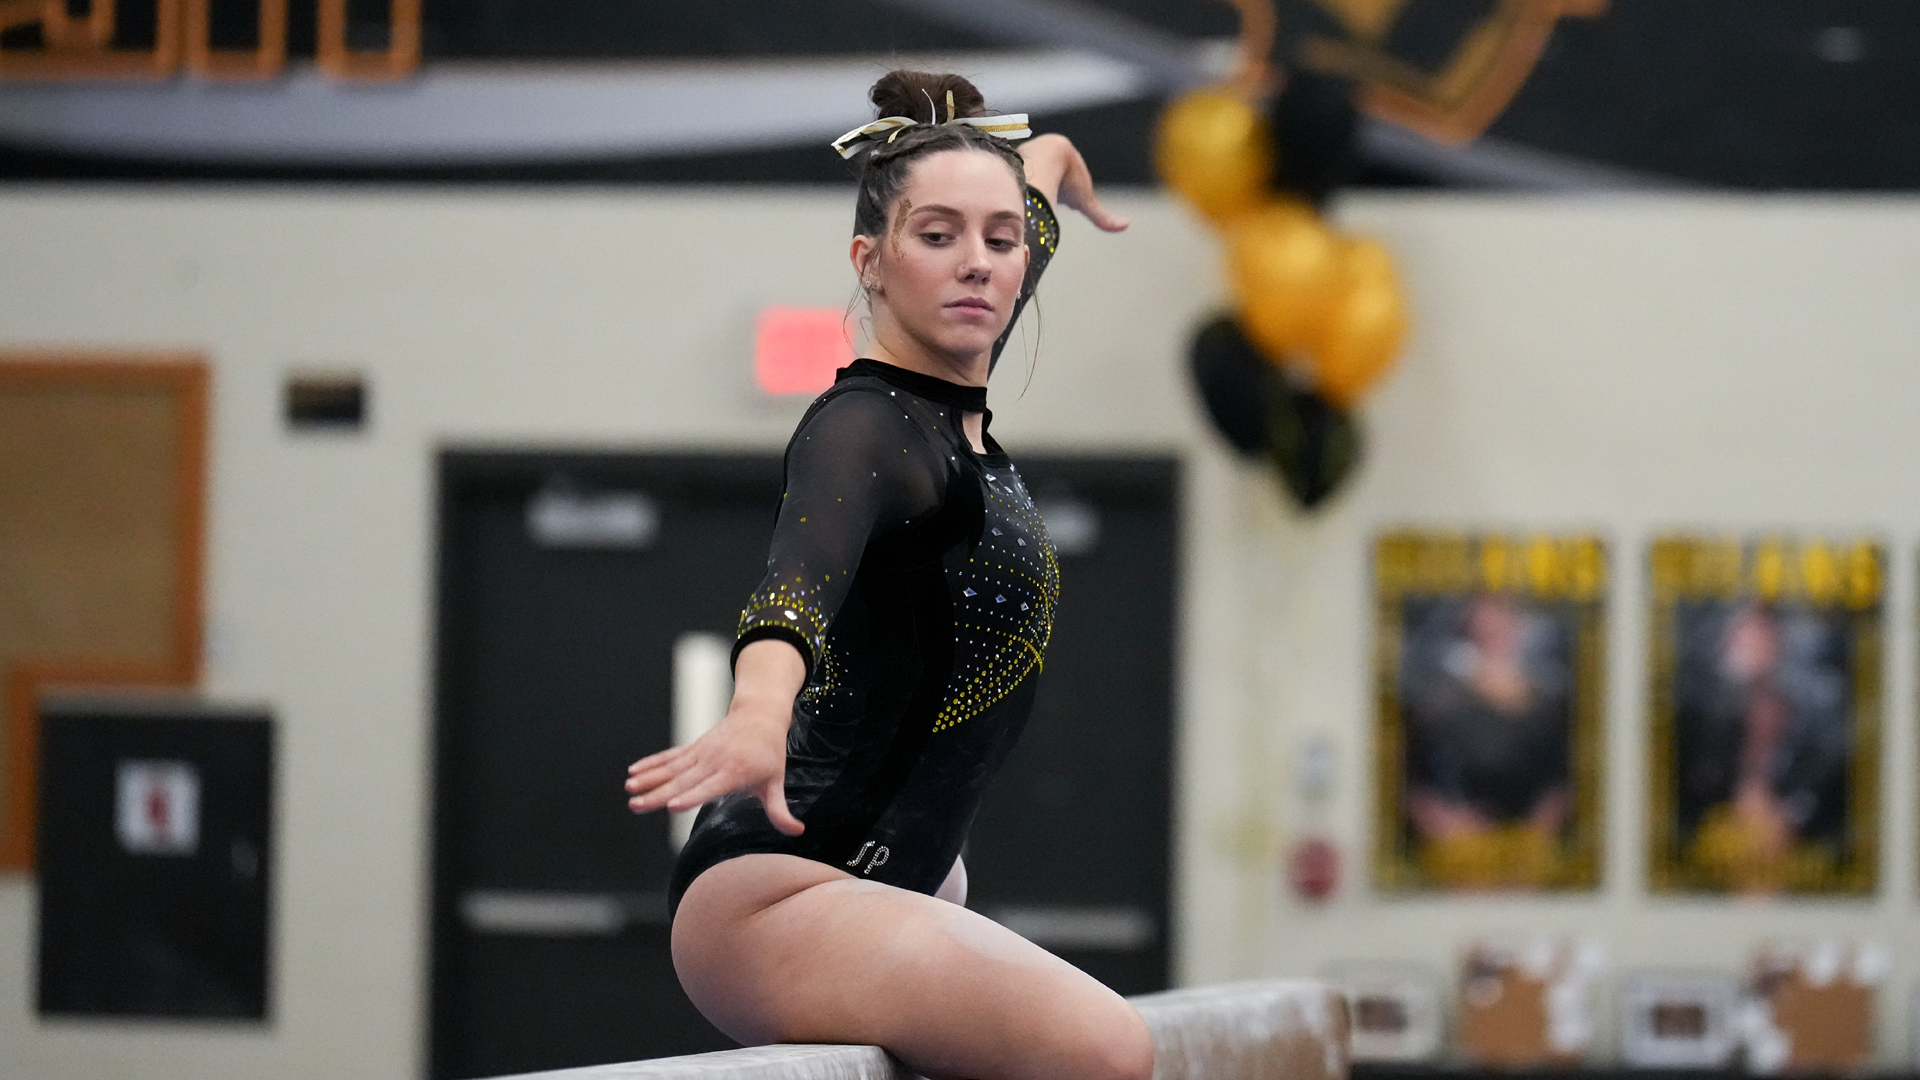 Emily Buffington set the program all-around record with 38.875 points in the Titans' win over the Warhawks on Friday. Photo Credit: Terri Cole, UW-Oshkosh Sports Information